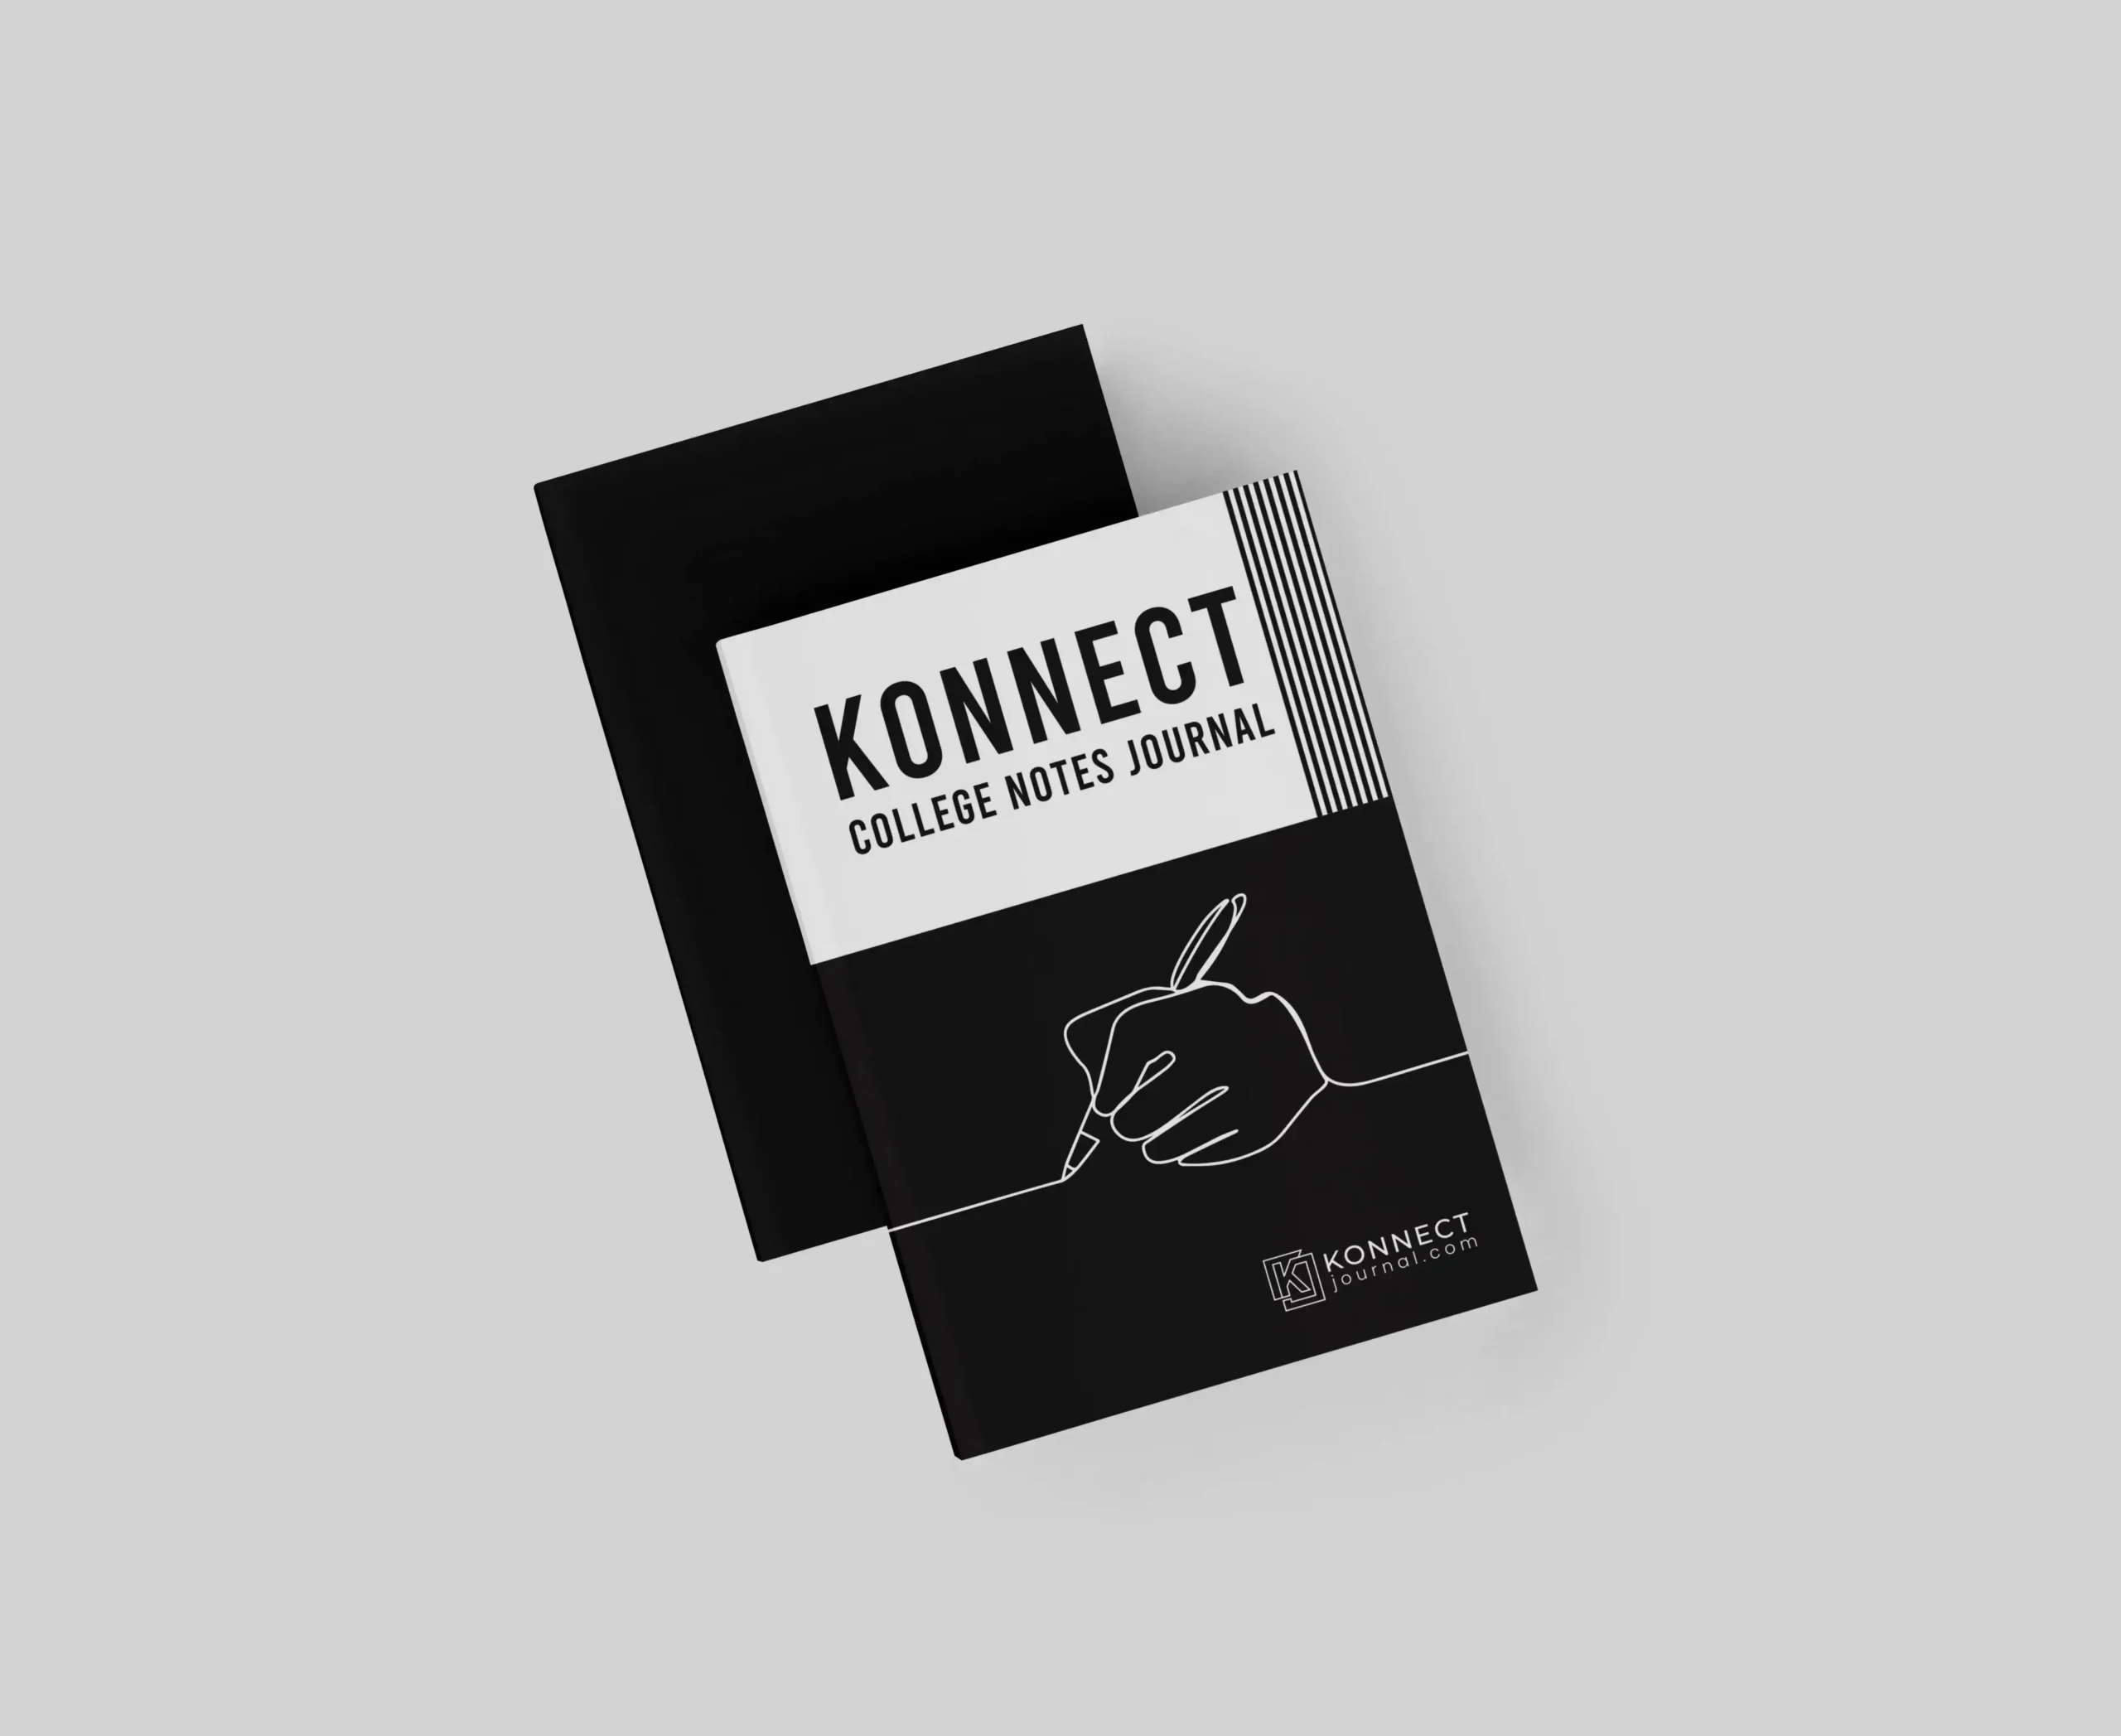 Konnect College Notes Journal cover